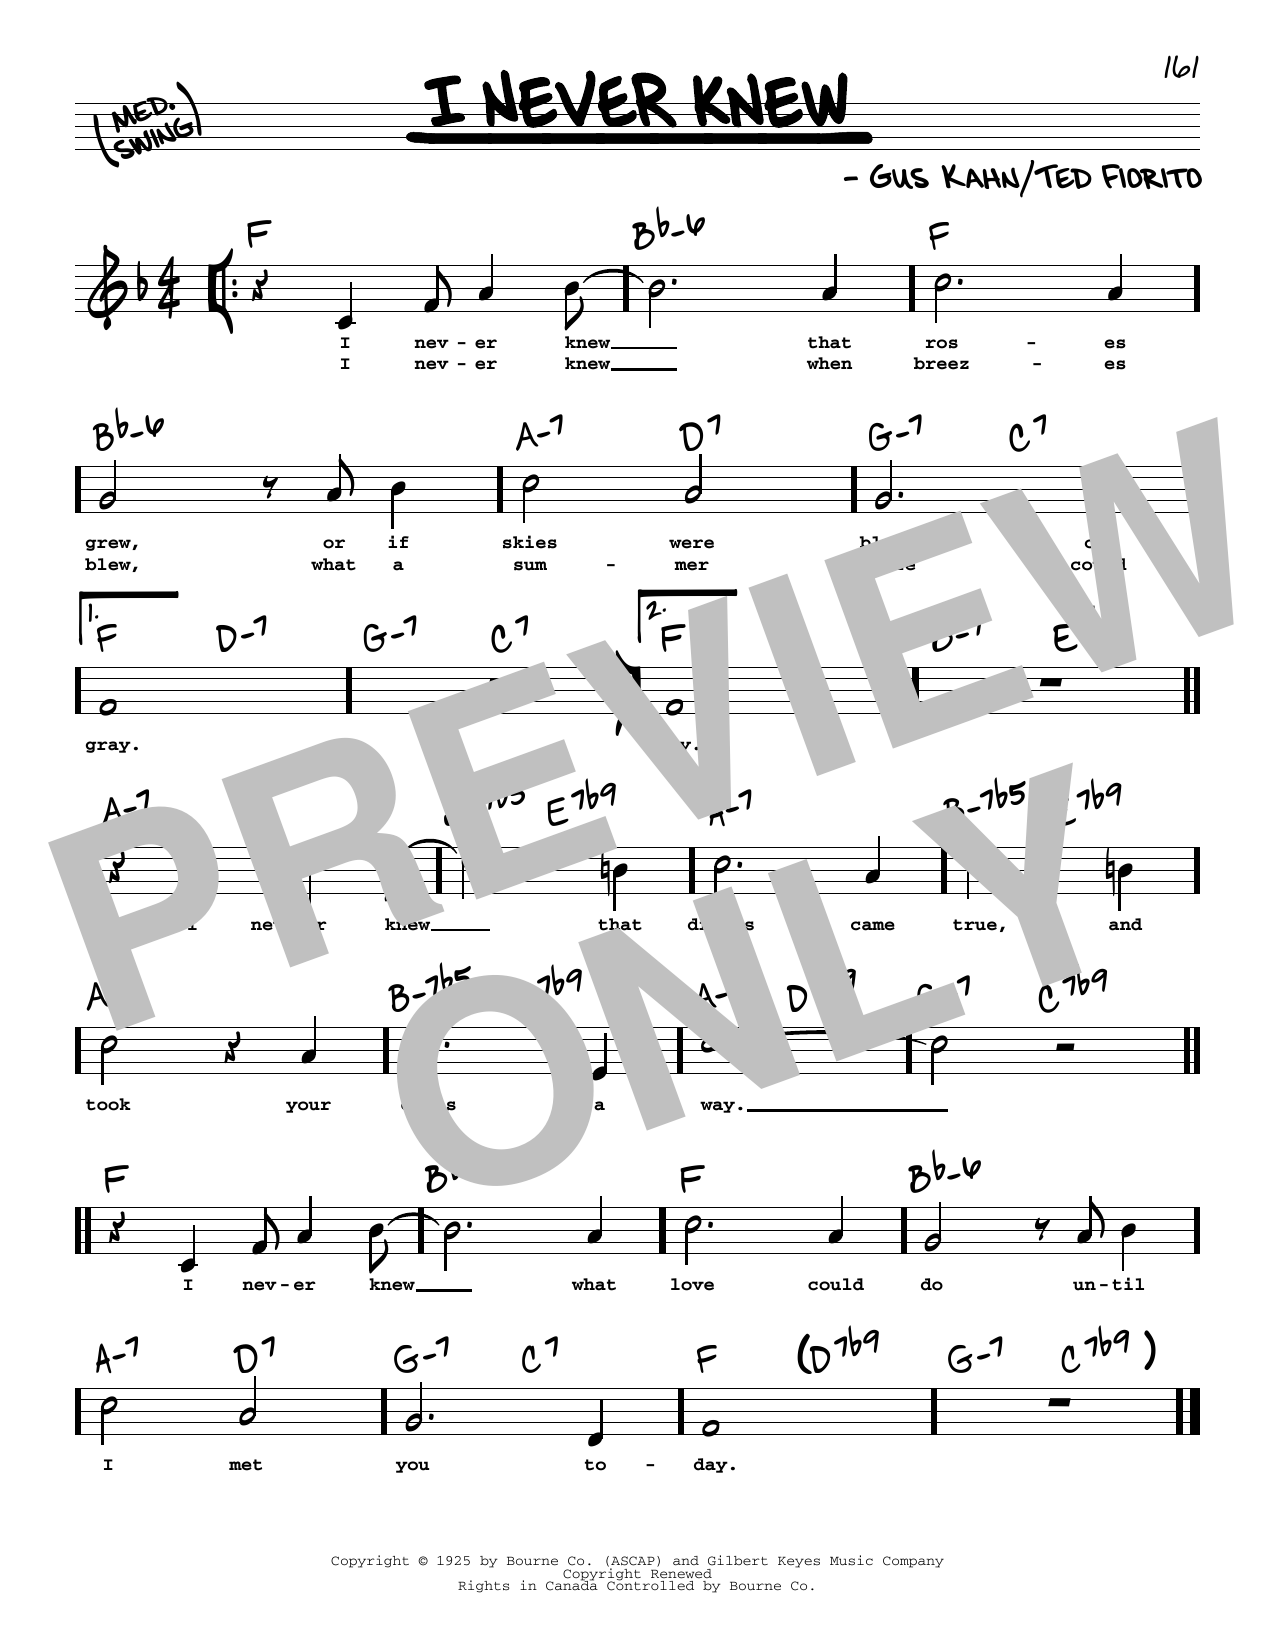 Download Gus Kahn and Ted Fiorito I Never Knew (High Voice) Sheet Music